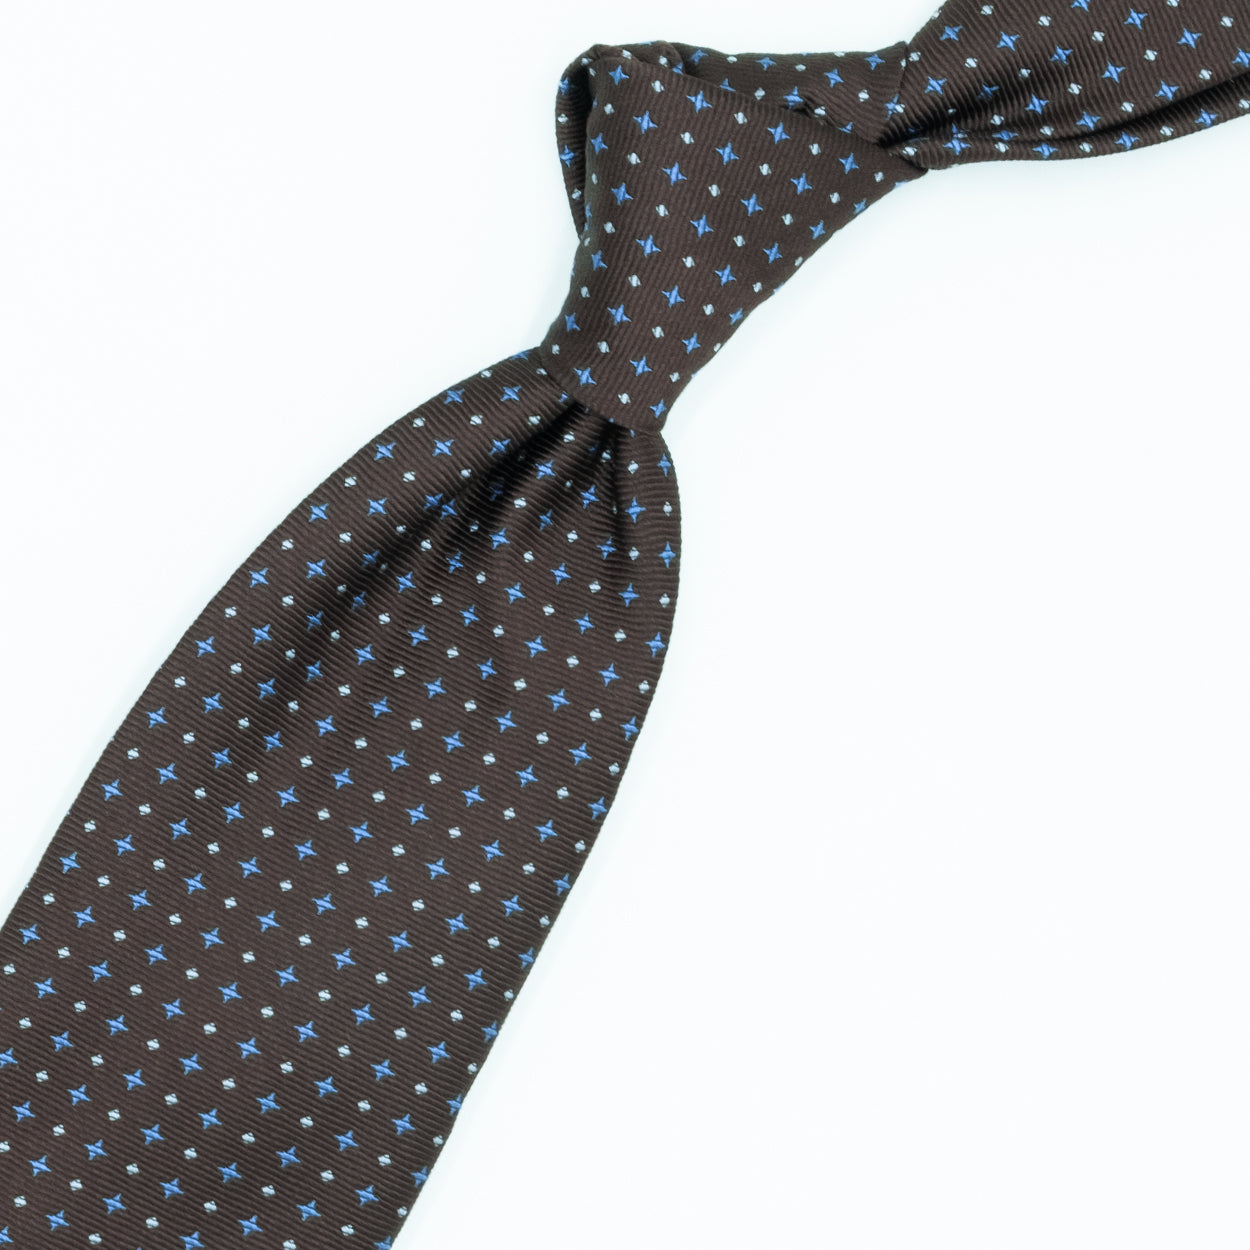 Brown tie with blue crosses and white dots